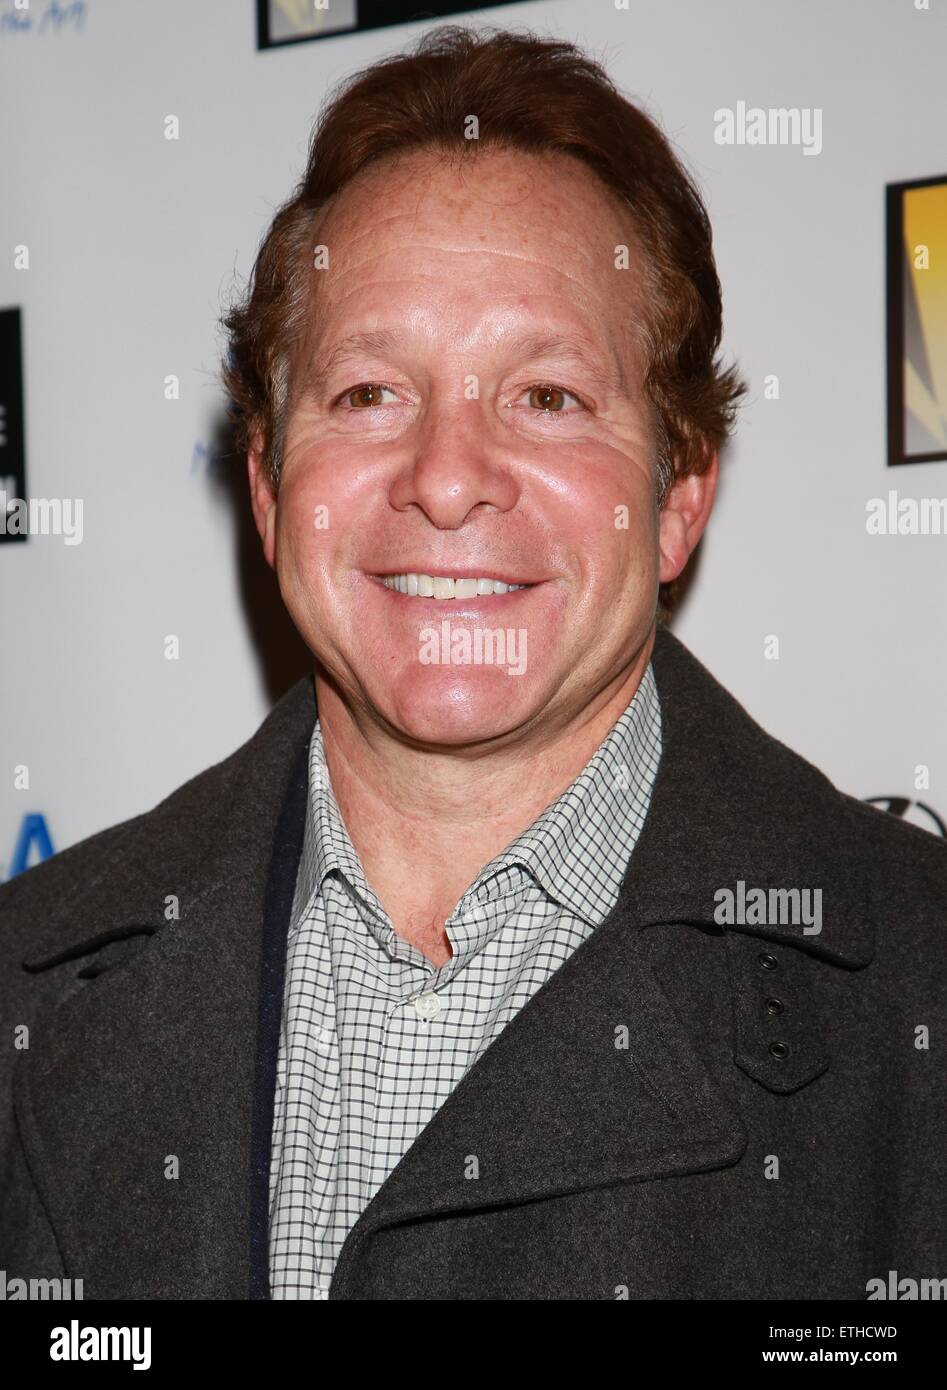 New York premiere party of 'Cop Show' at Caroline's On Broadway Comedy Club - Arrivals  Featuring: Steve Guttenberg Where: New York, New York, United States When: 24 Feb 2015 Credit: Joseph Marzullo/WENN.com Stock Photo